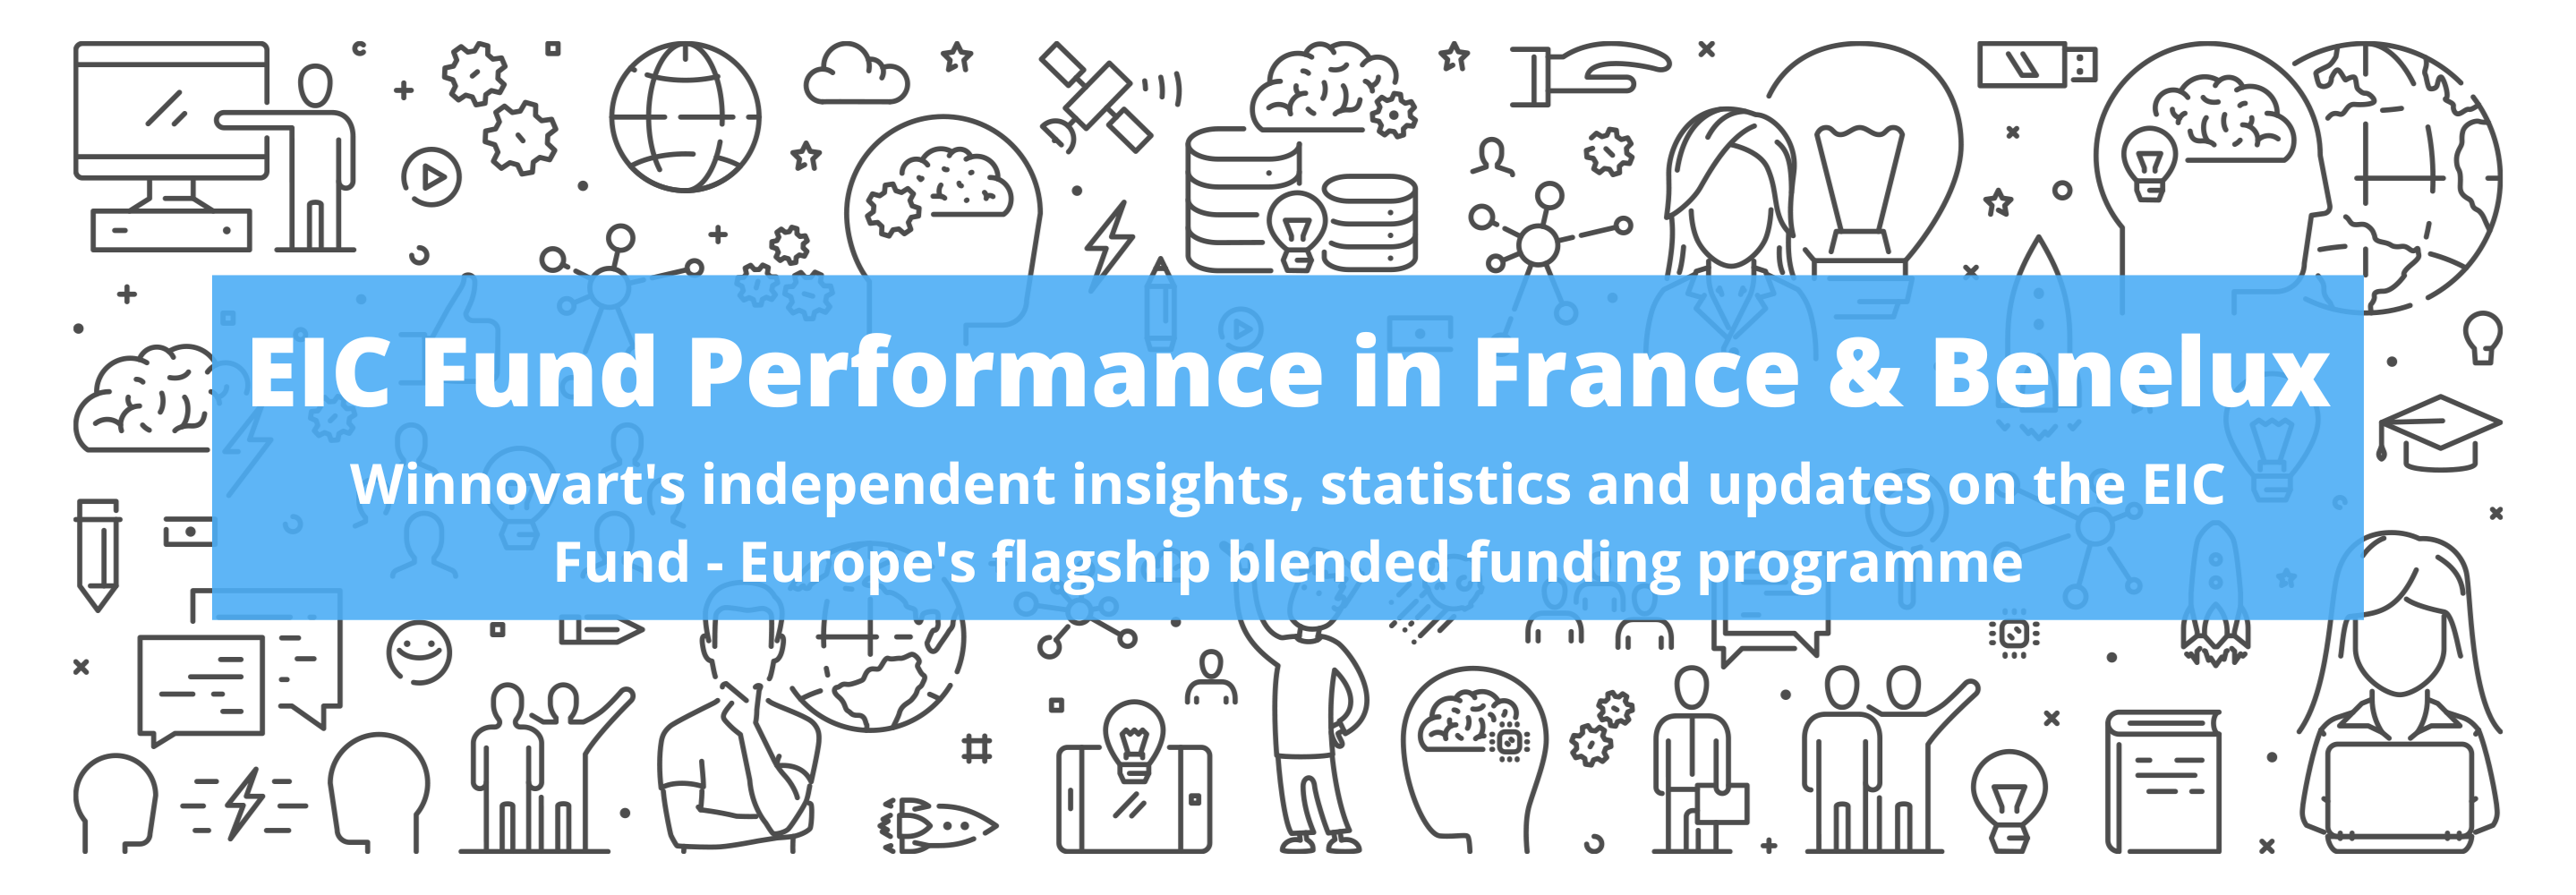 EIC Fund Performance in France & Benelux